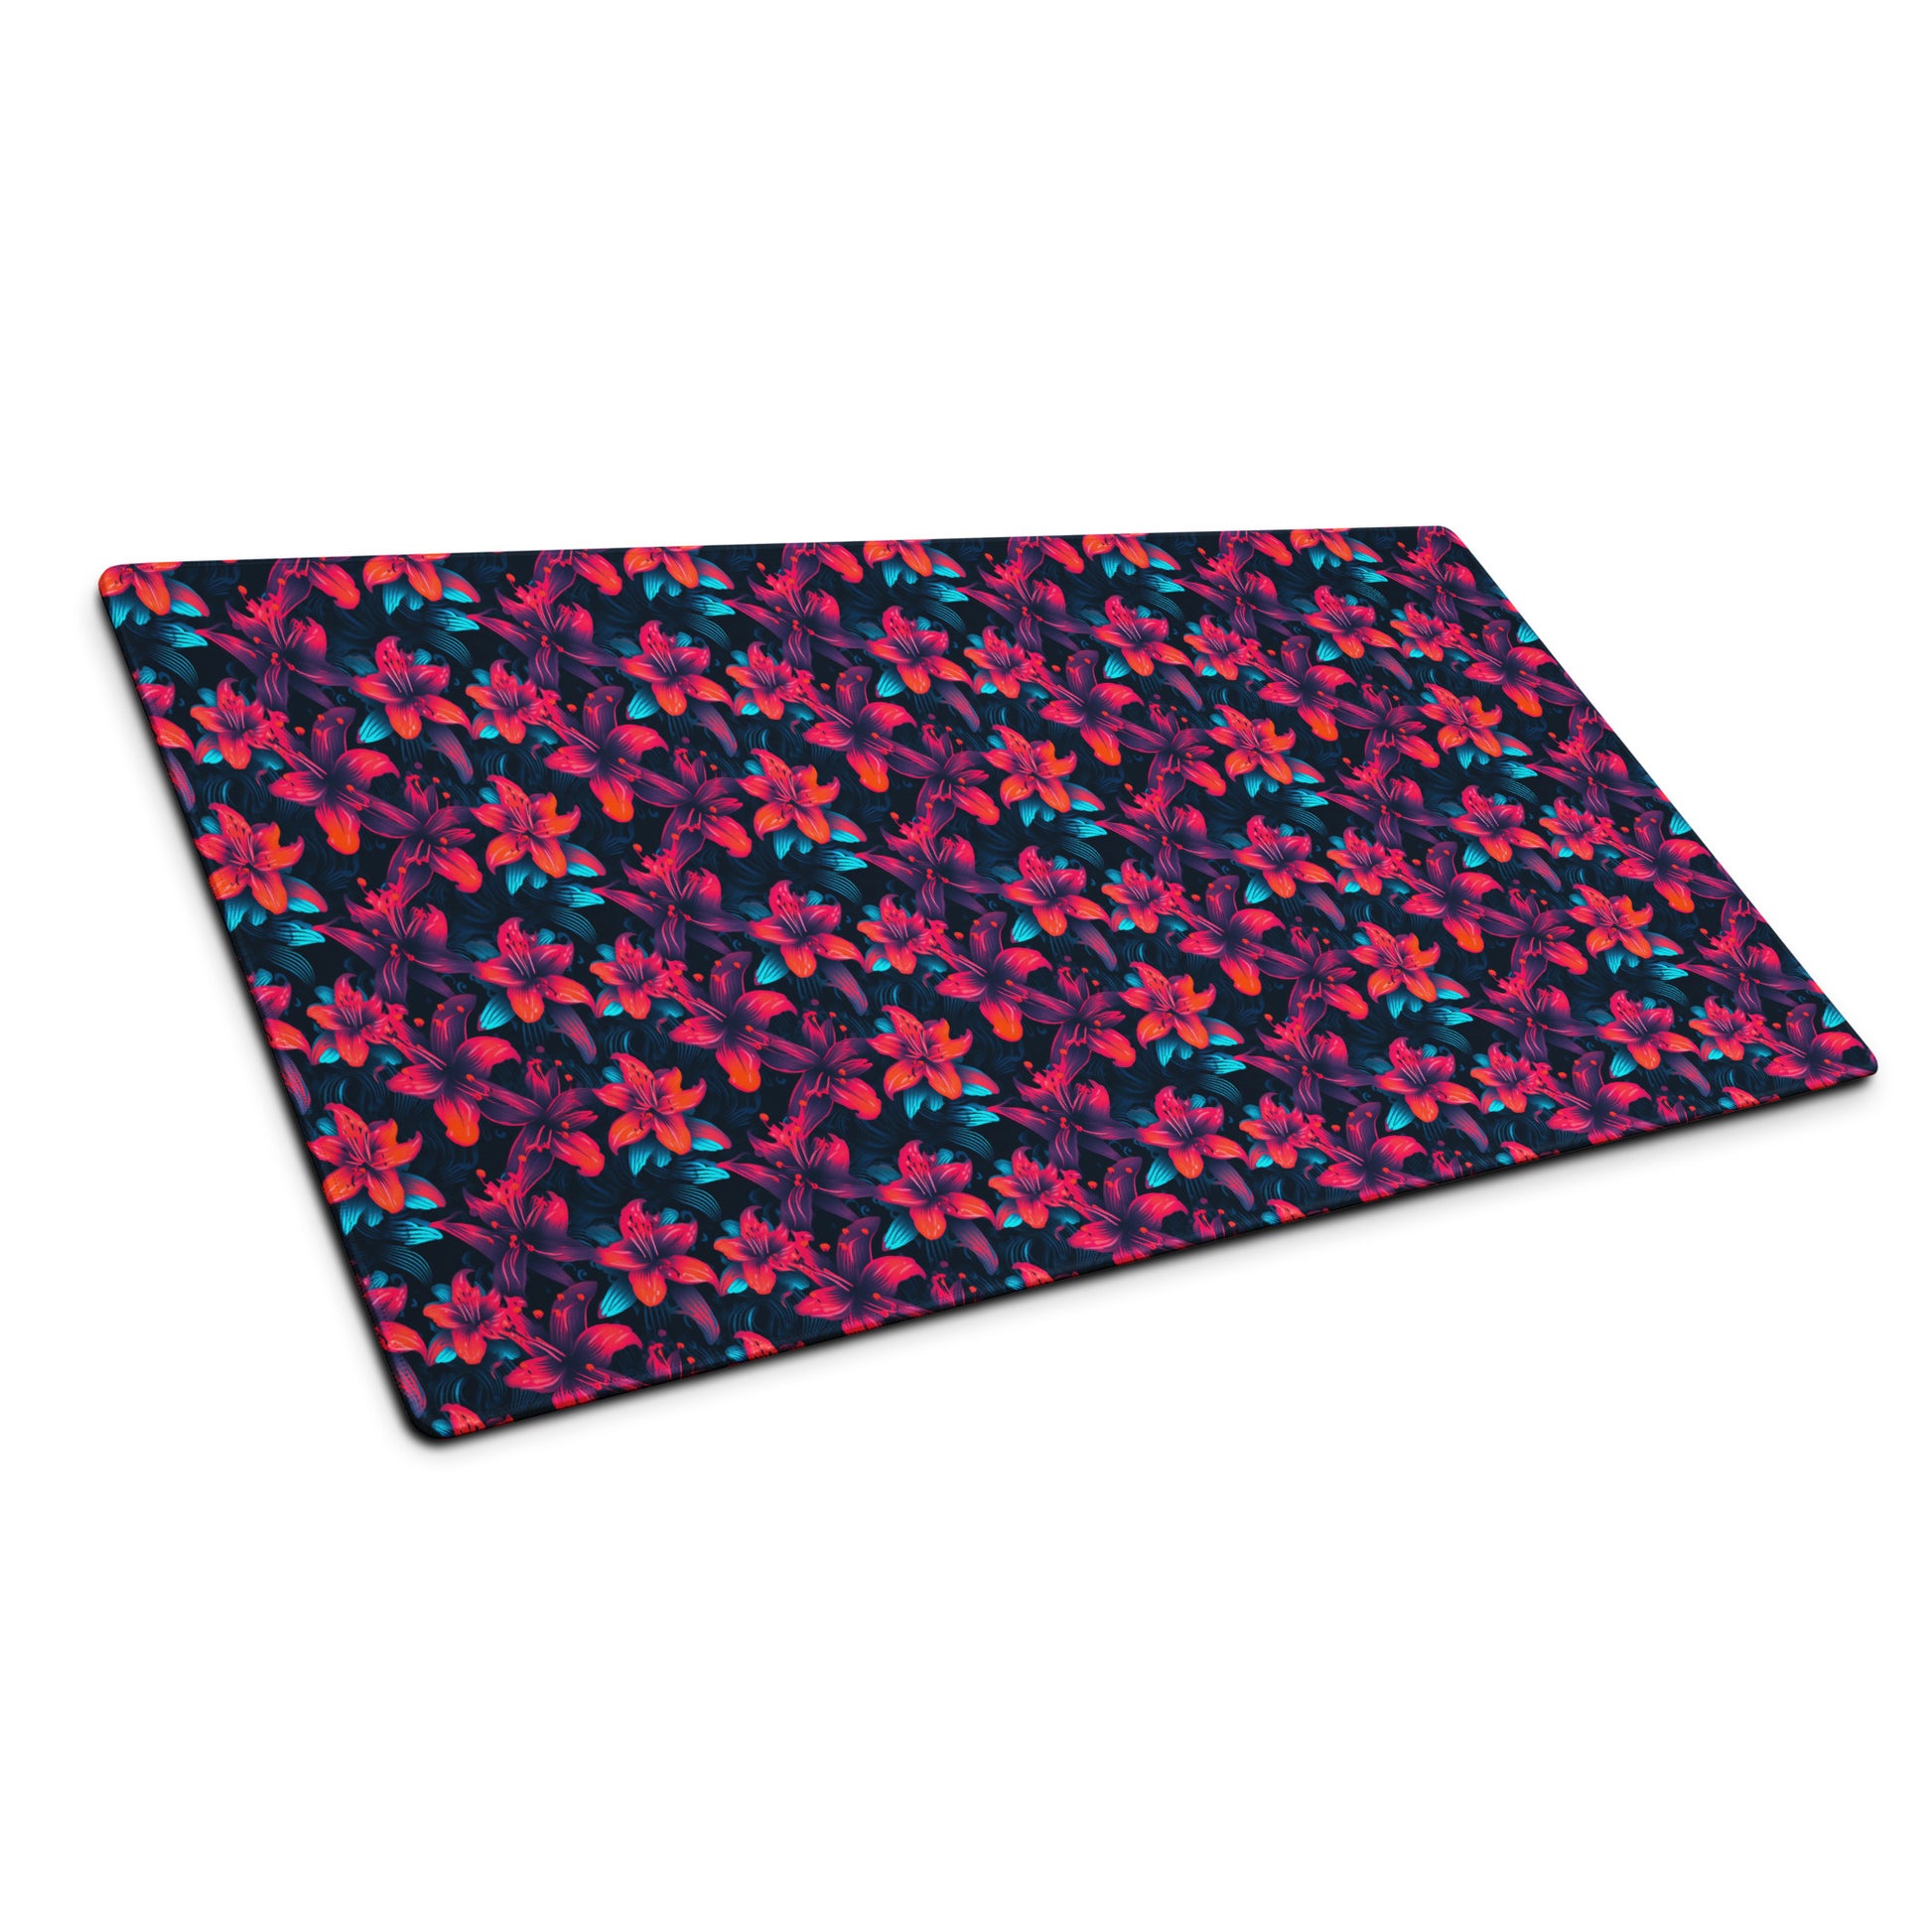 A 36" x 18" desk pad with a neon red and blue floral pattern sitting at an angle.